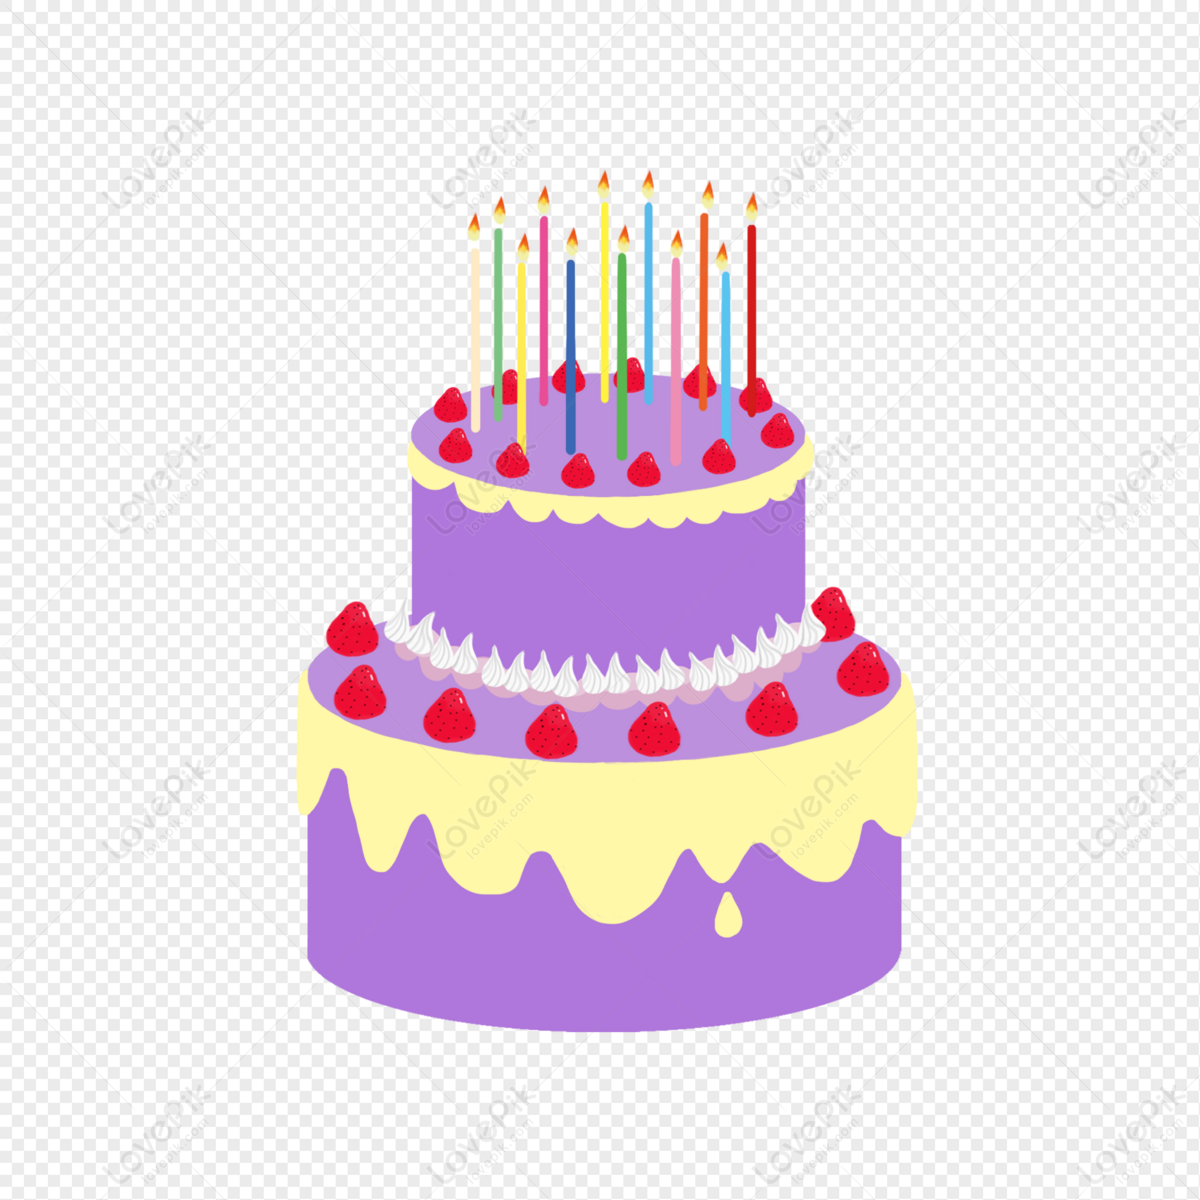 Birthday Cake PNG Image Free Download And Clipart Image For Free ...